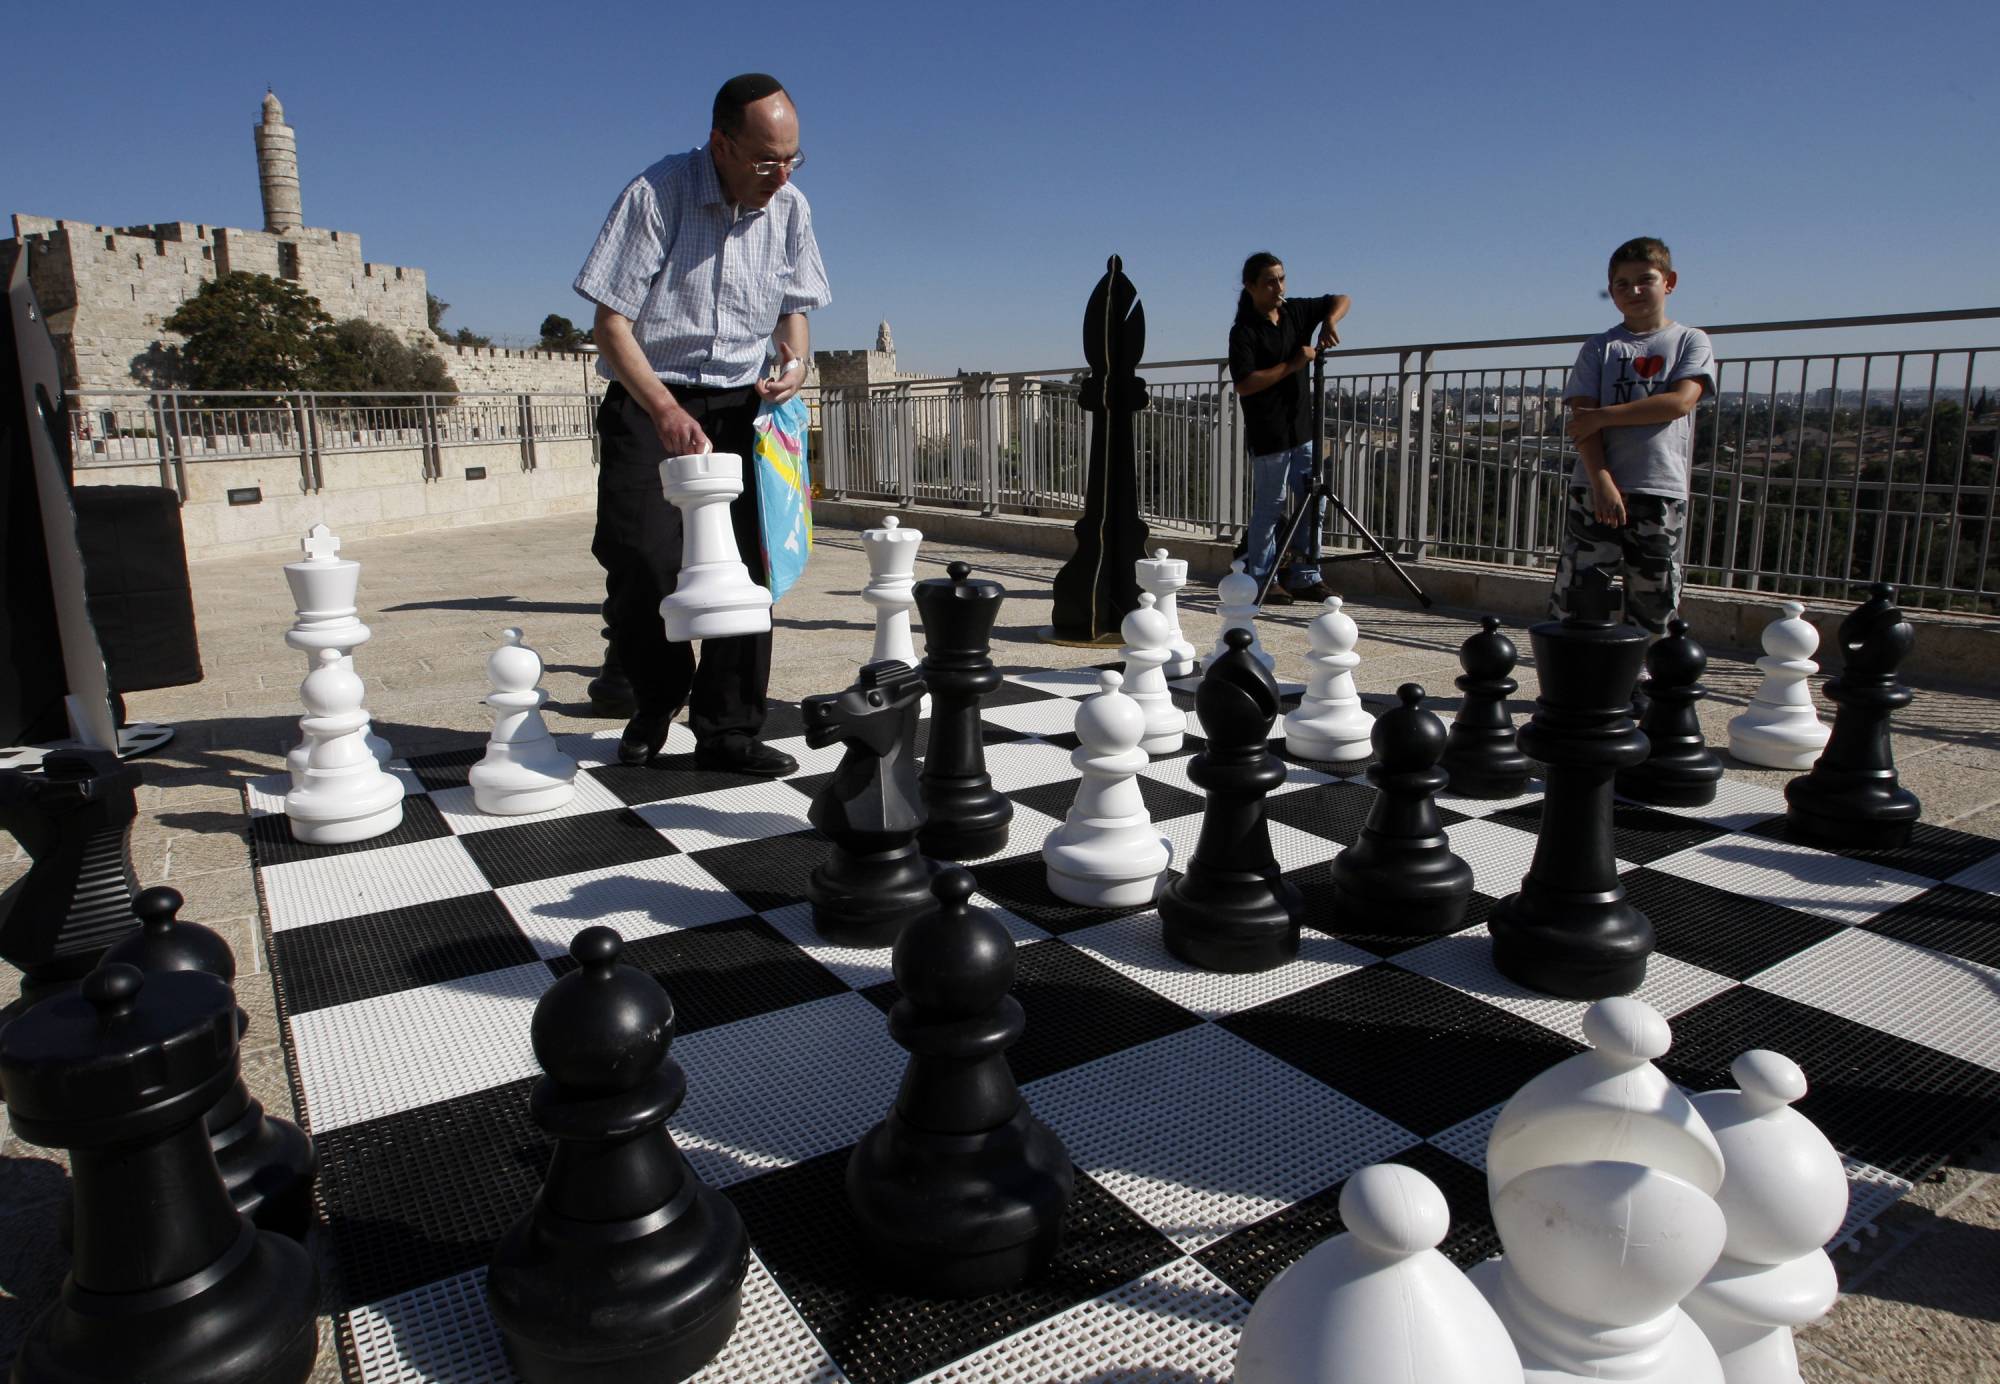 The chess scandal gripping the world